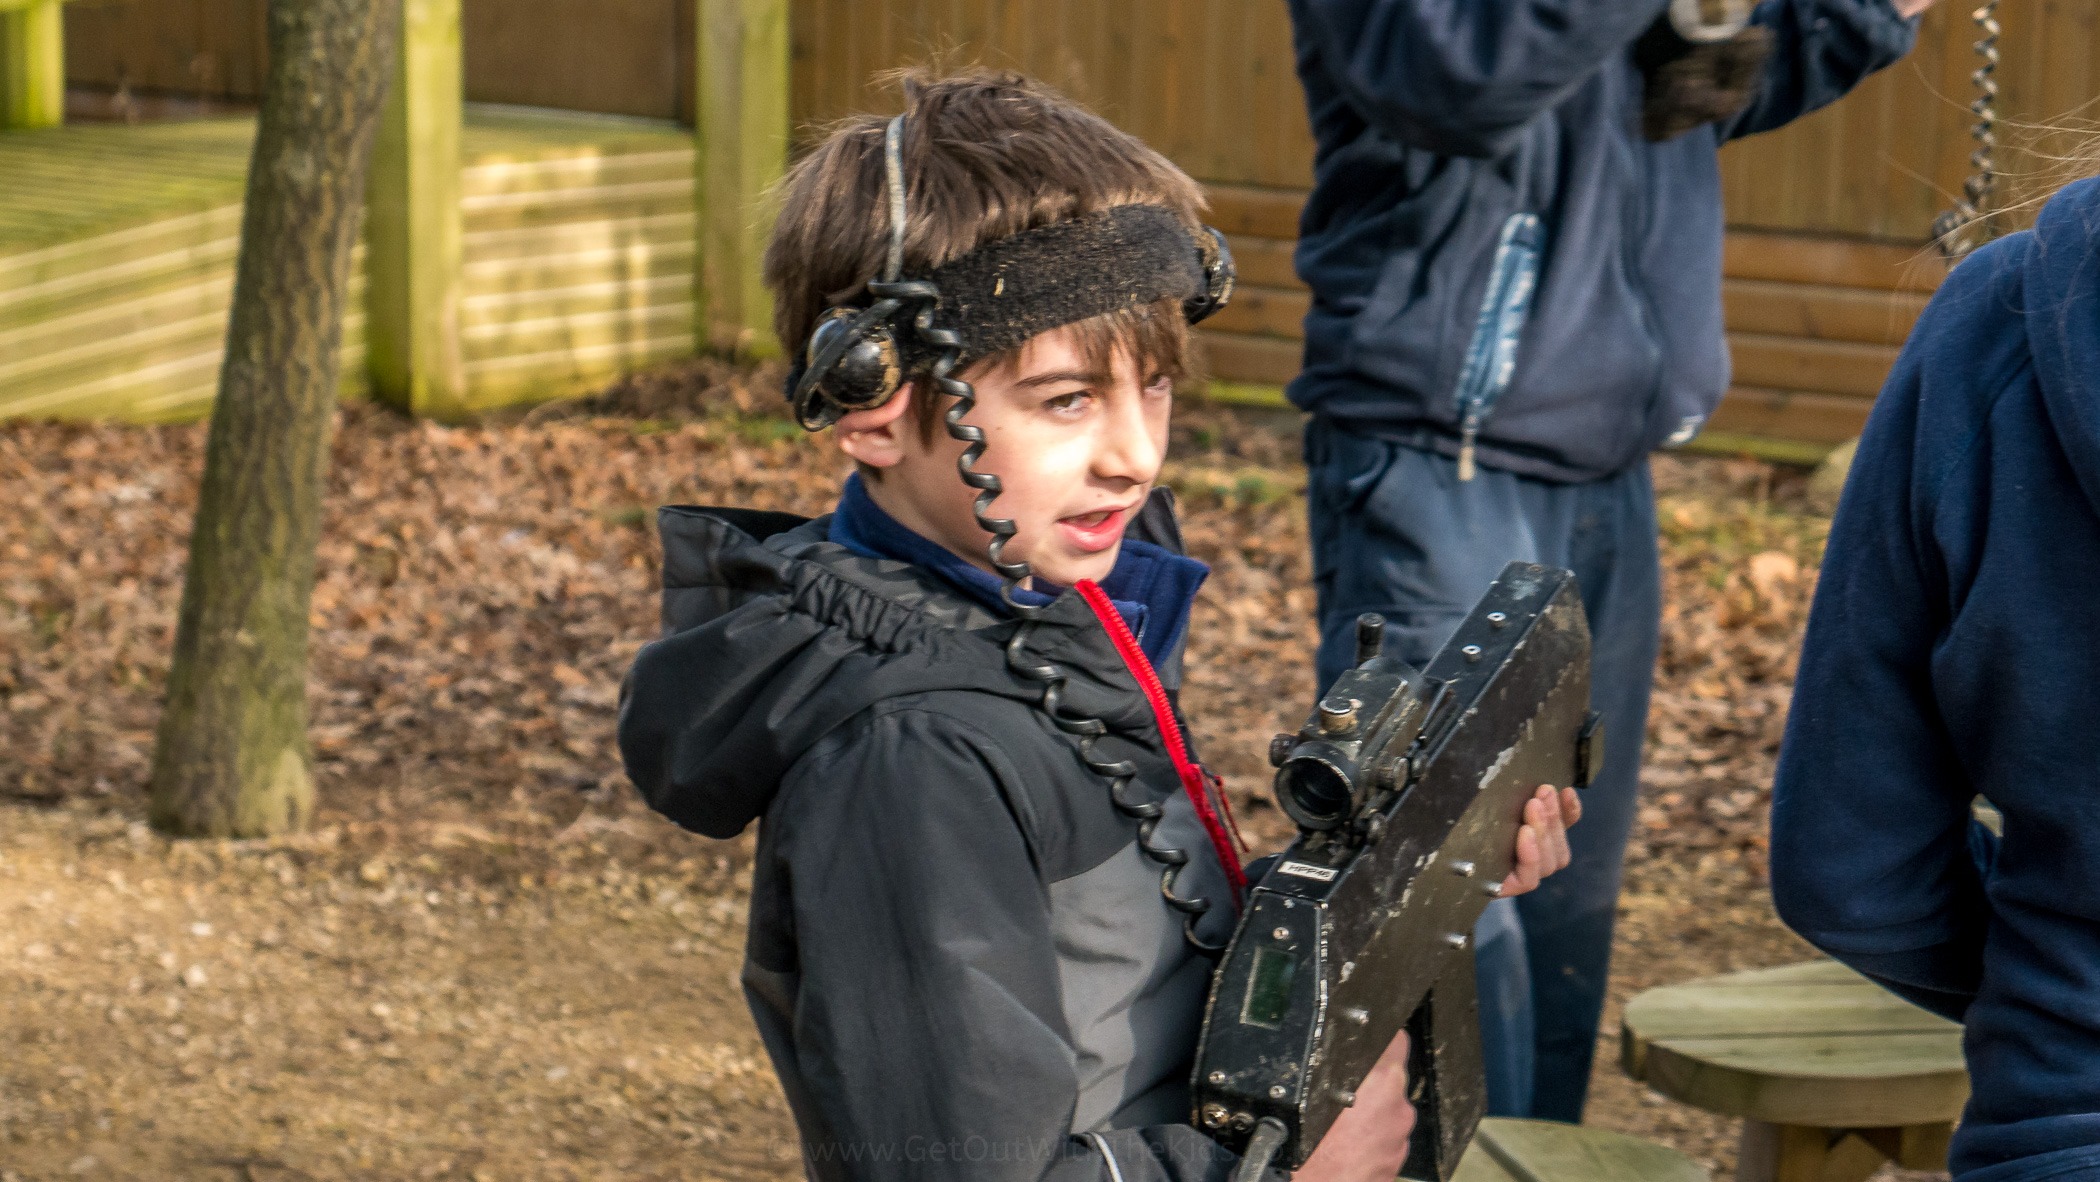  Armed and ready for laser combat at the Outdoor Adventure Zone